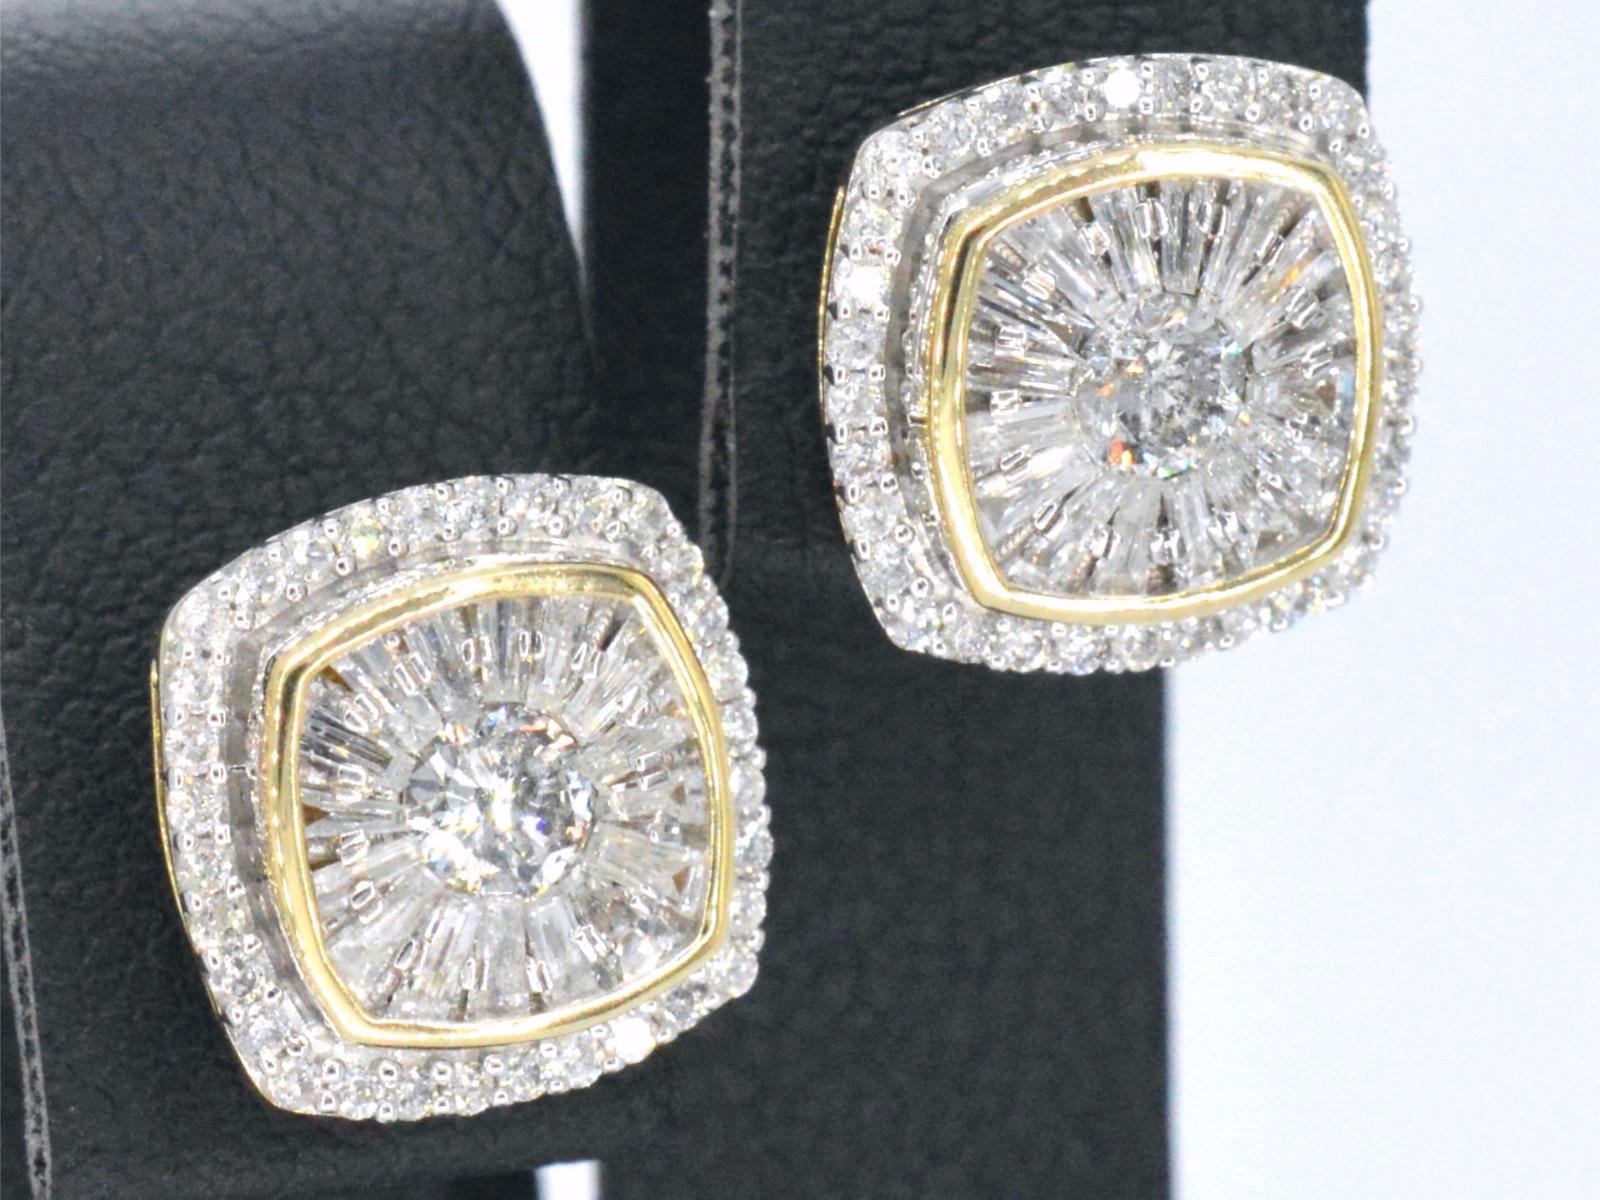 These stunning entourage earrings are crafted from 14 karat gold, a high-quality and durable material that will stand the test of time. The earrings are set with 1.20 carats of diamonds, arranged in a classic and elegant entourage style. The